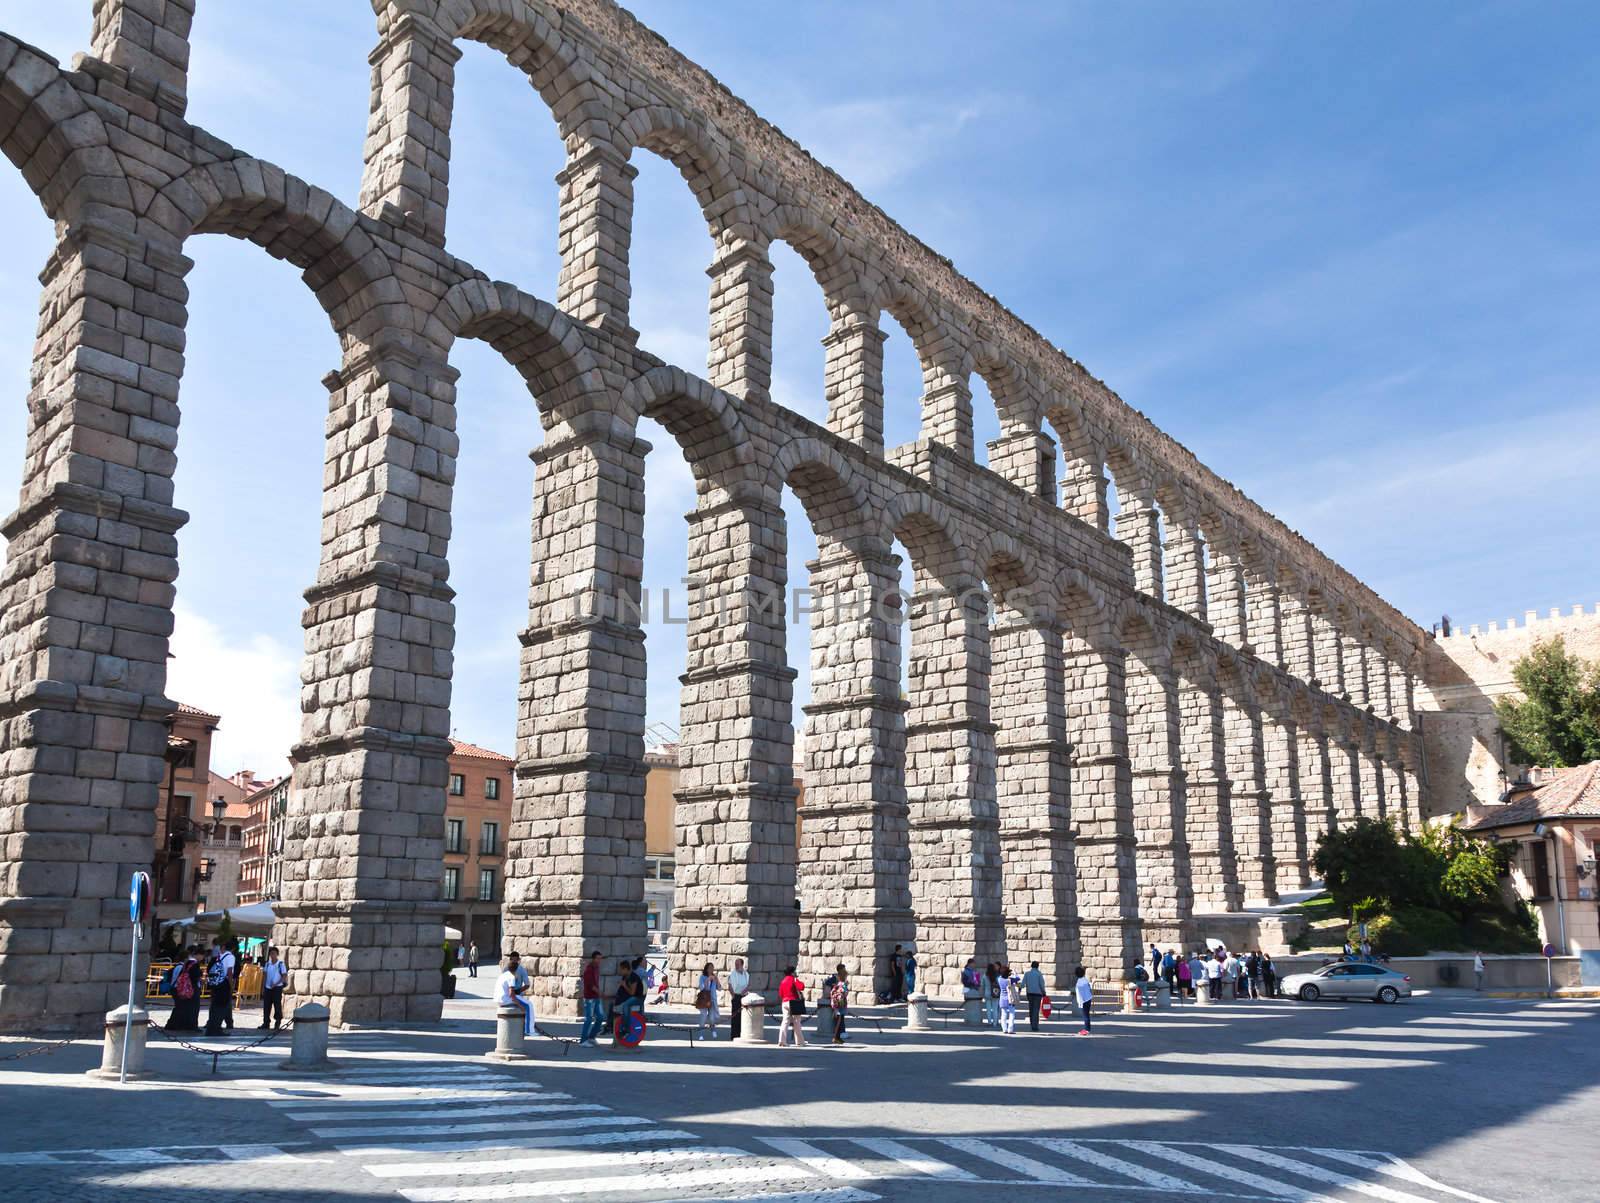 The ancient aqueduct in Segovia by gary718